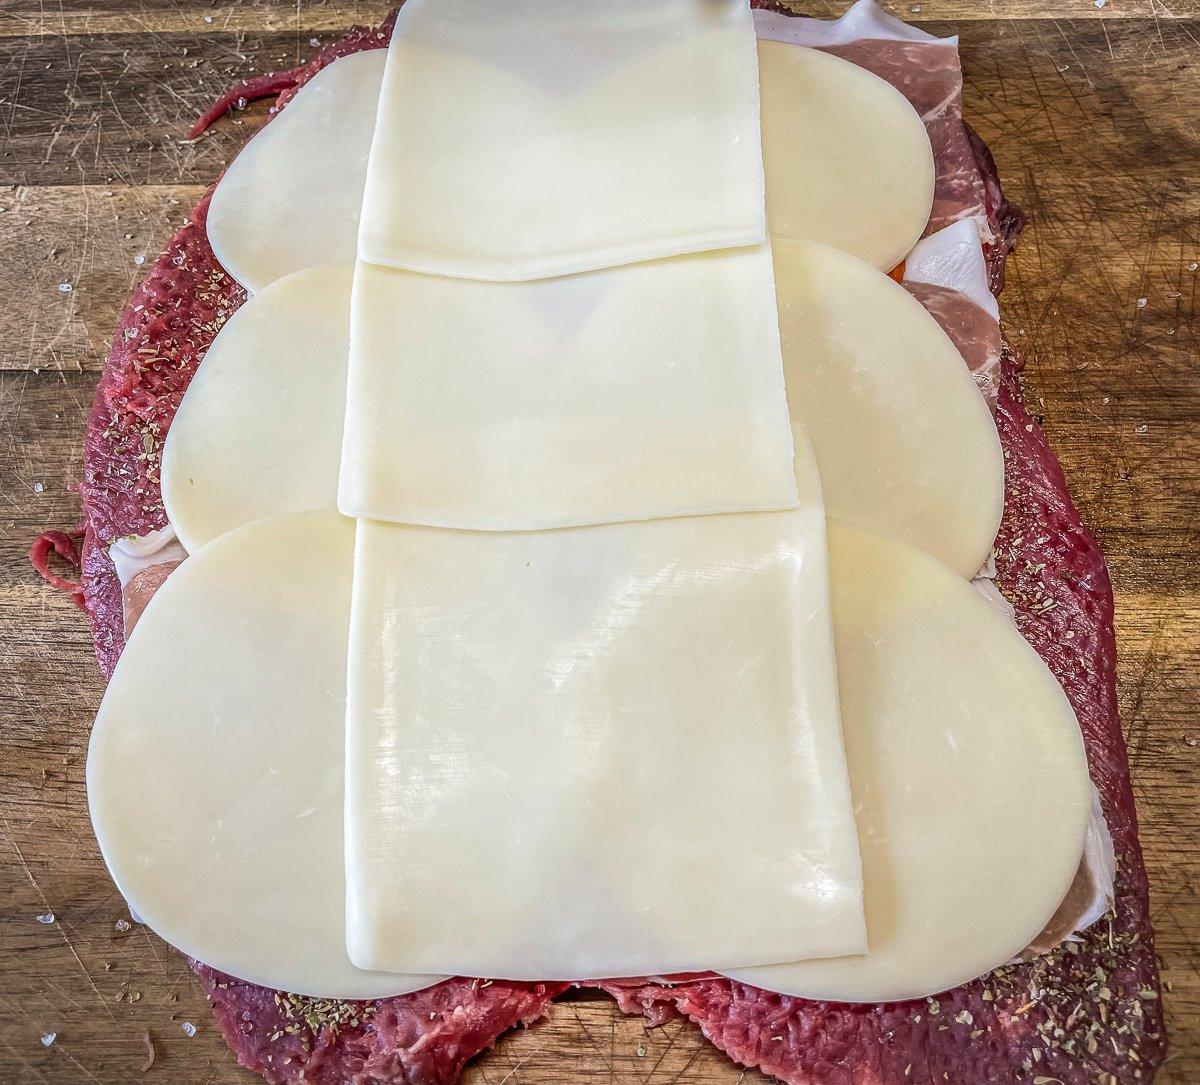 Top the meat with sliced provolone and mozzarella cheese.